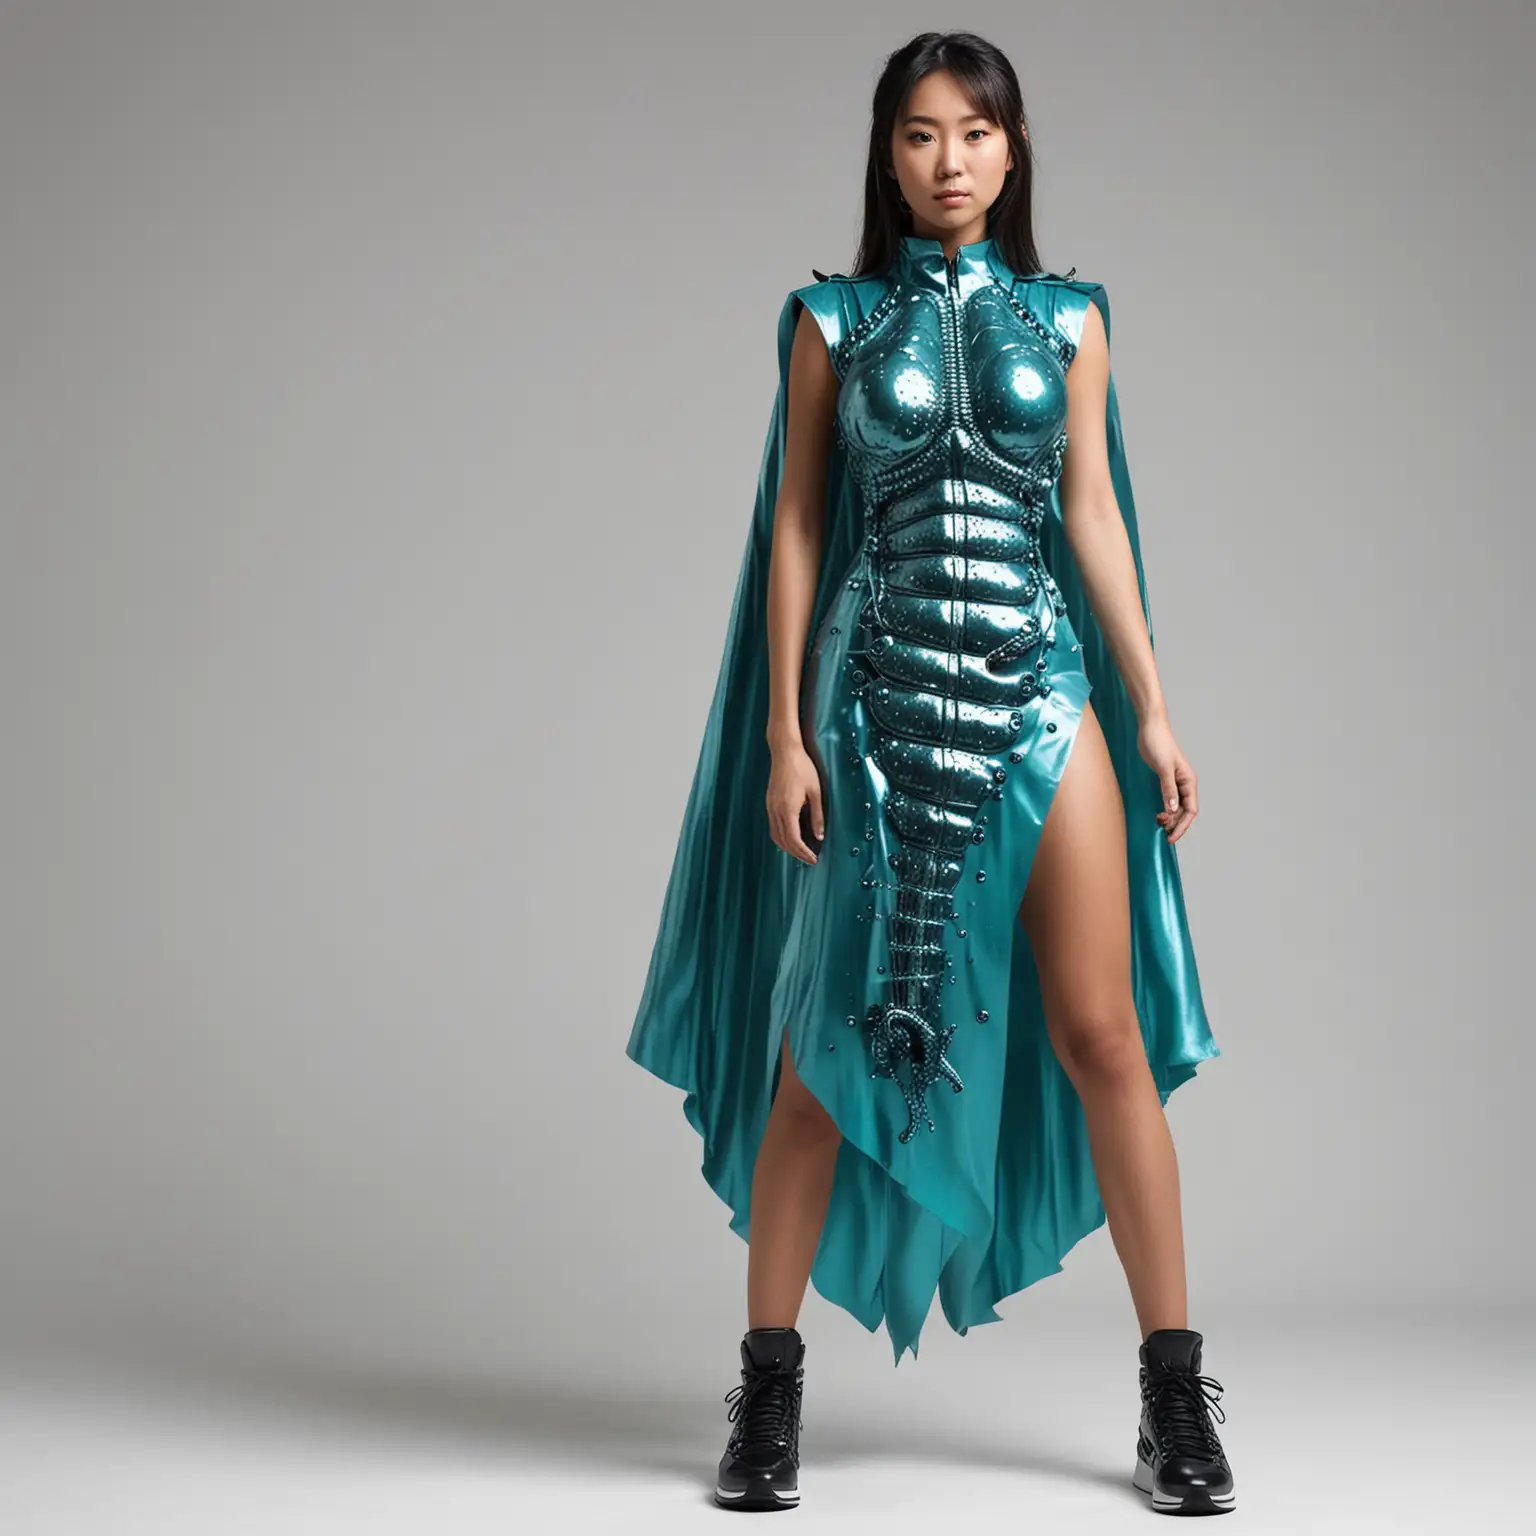 Stunning Japanese Woman in Teal Seahorse Dress on White Background